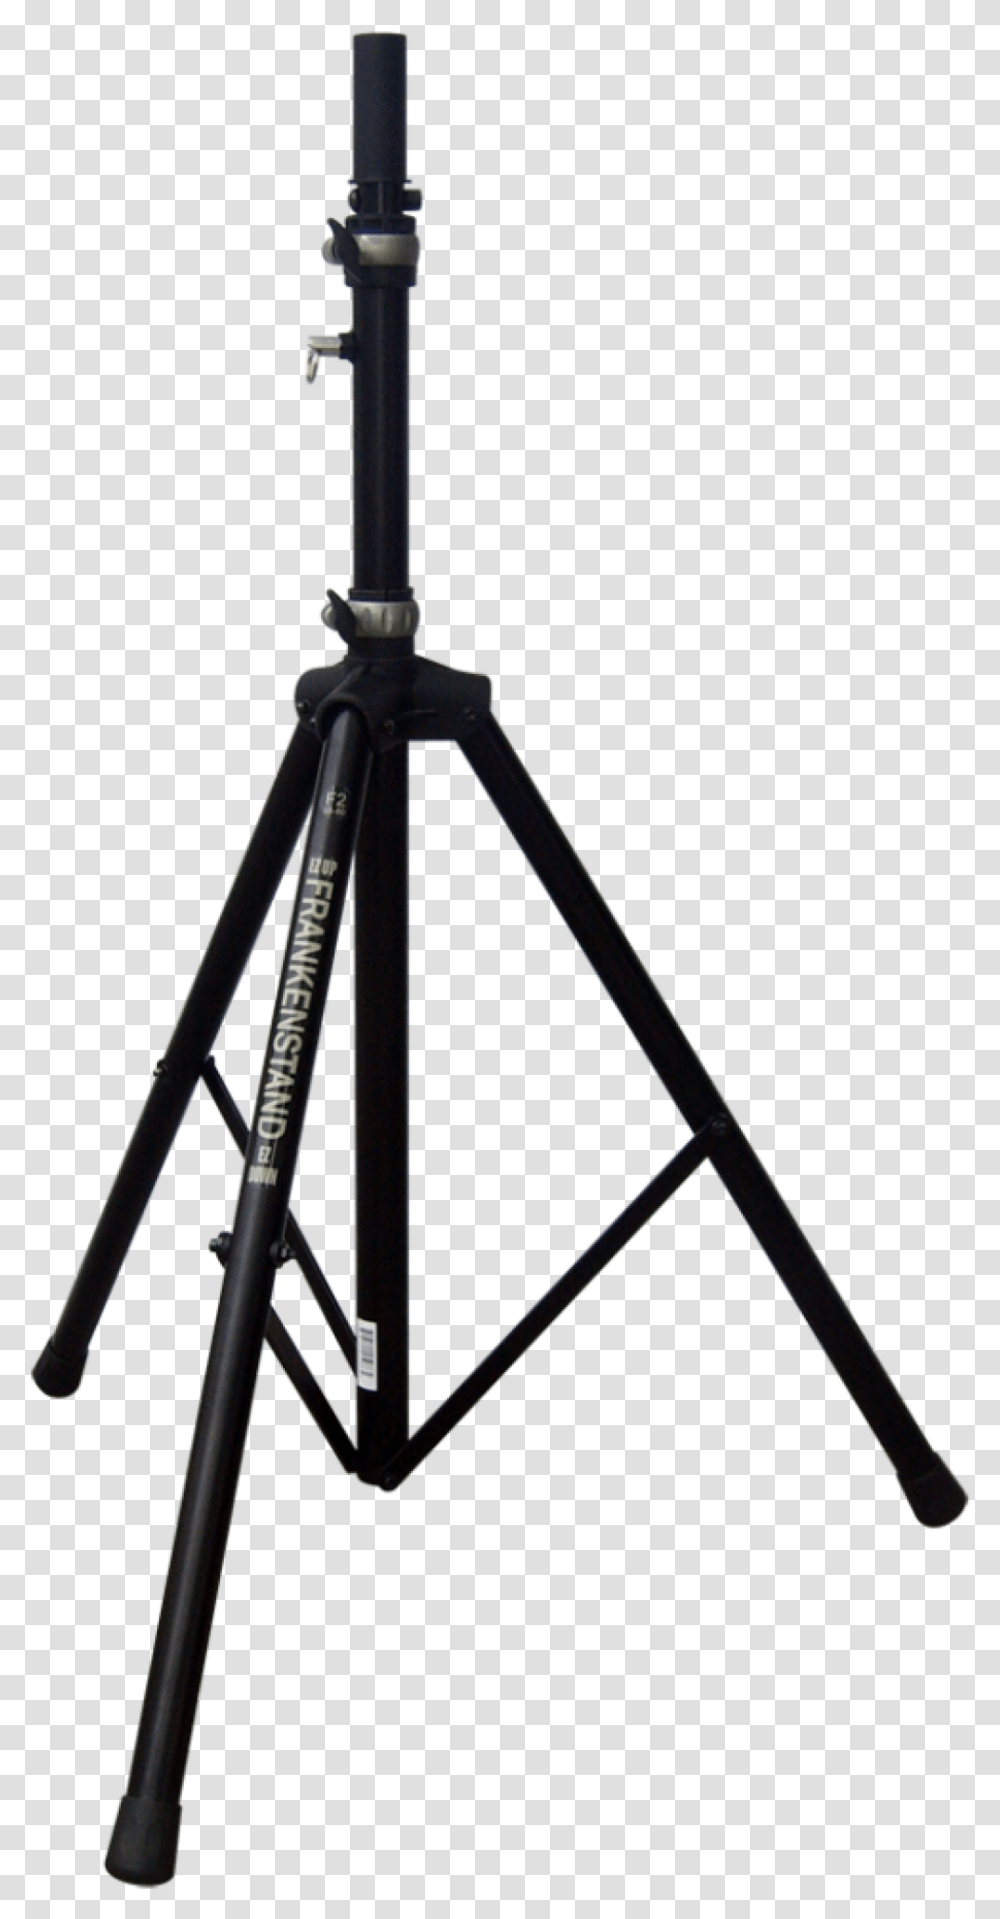 Speaker On A Stand Cartoon, Tripod, Bow Transparent Png